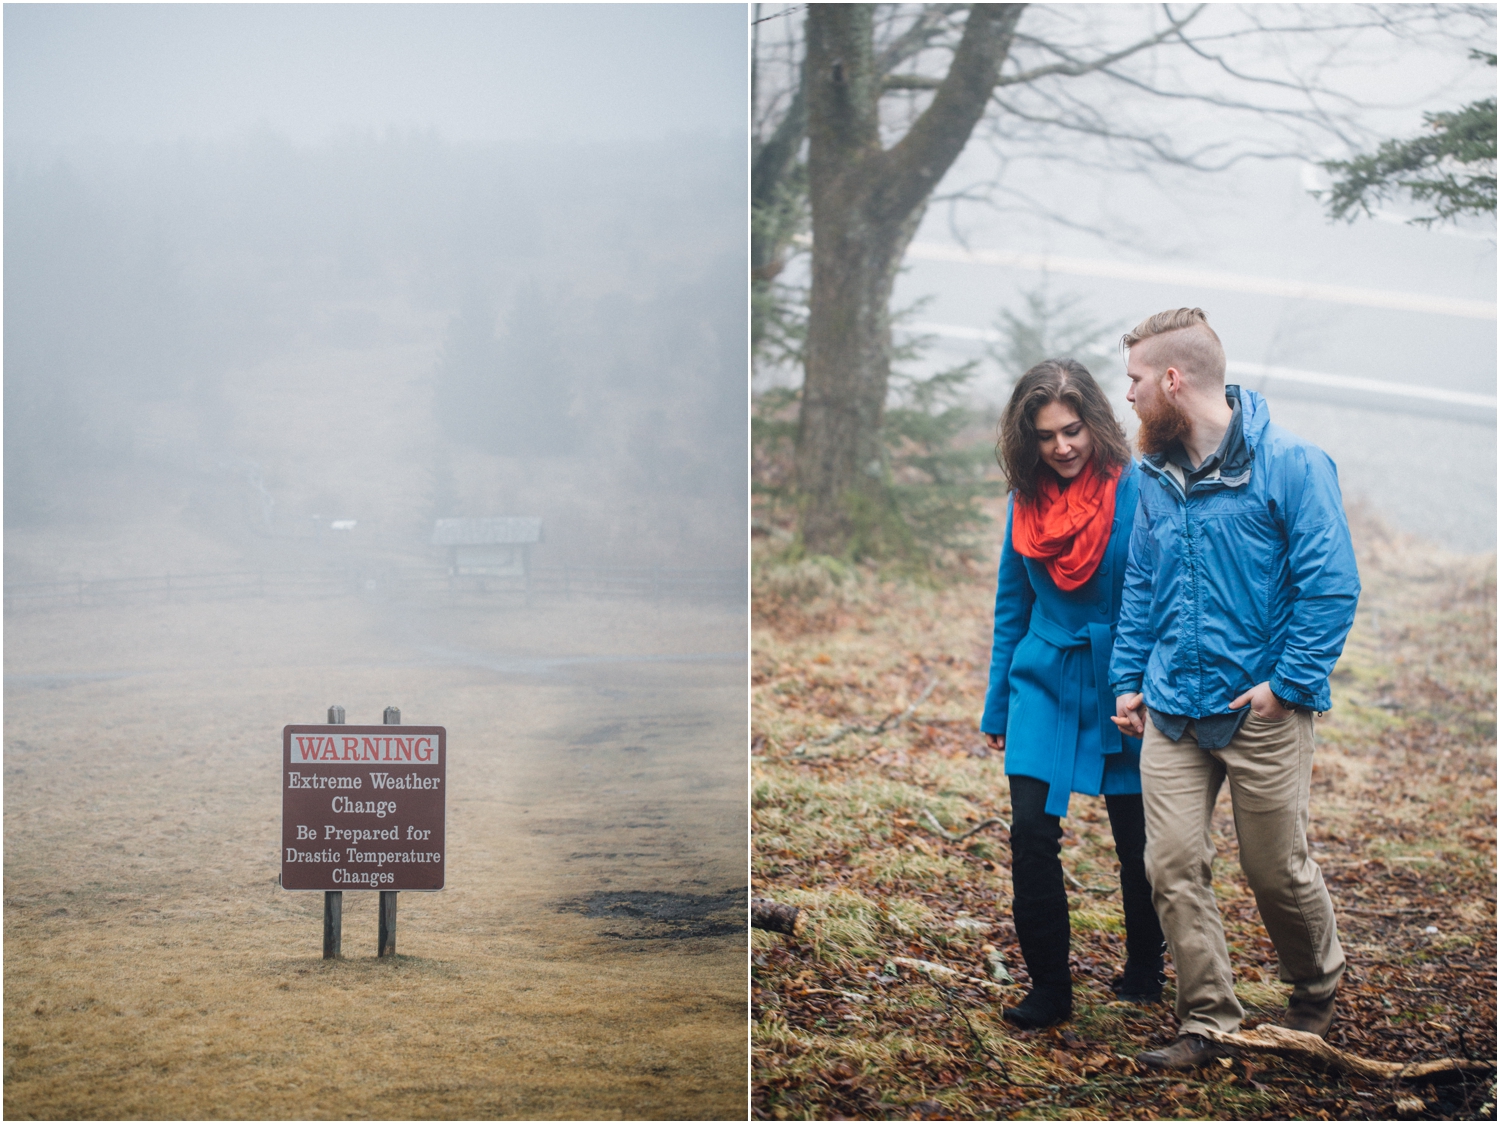 katy-sergent-photography-grayson-highlands-engagement-session-mouth-of-wilson-virginia-damascus-appalachian-trail-tennessee-wedding-elopement_0012.jpg